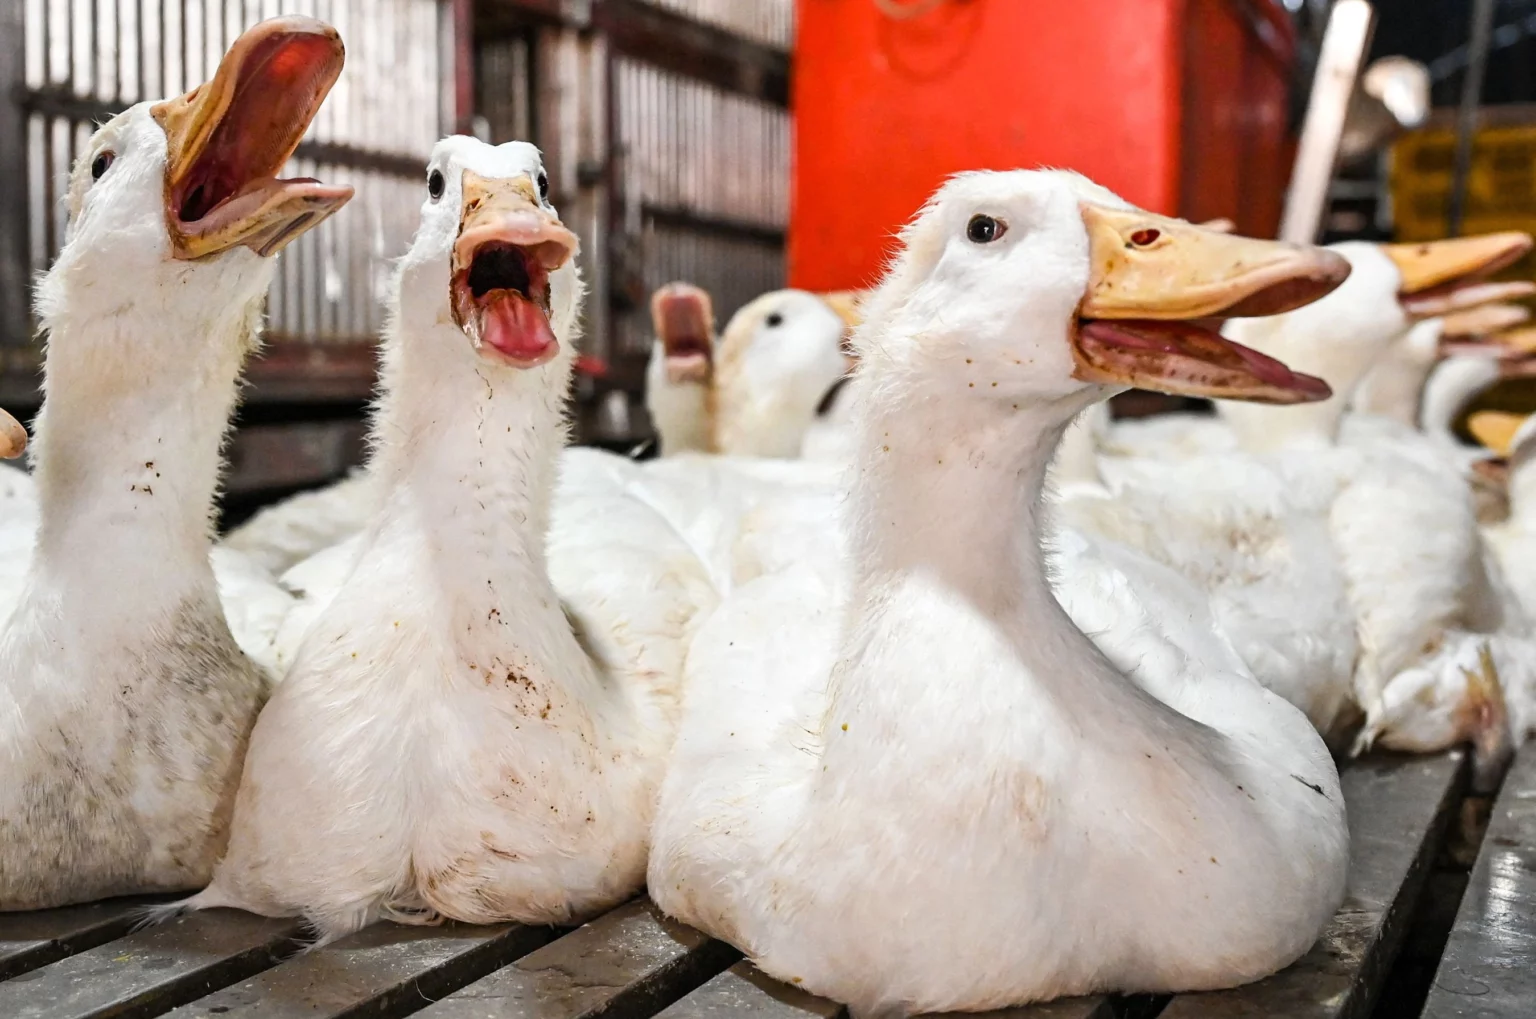 france-to-vaccinate-millions-of-ducks-against-bird-flu-amid-trade-backlash-concerns